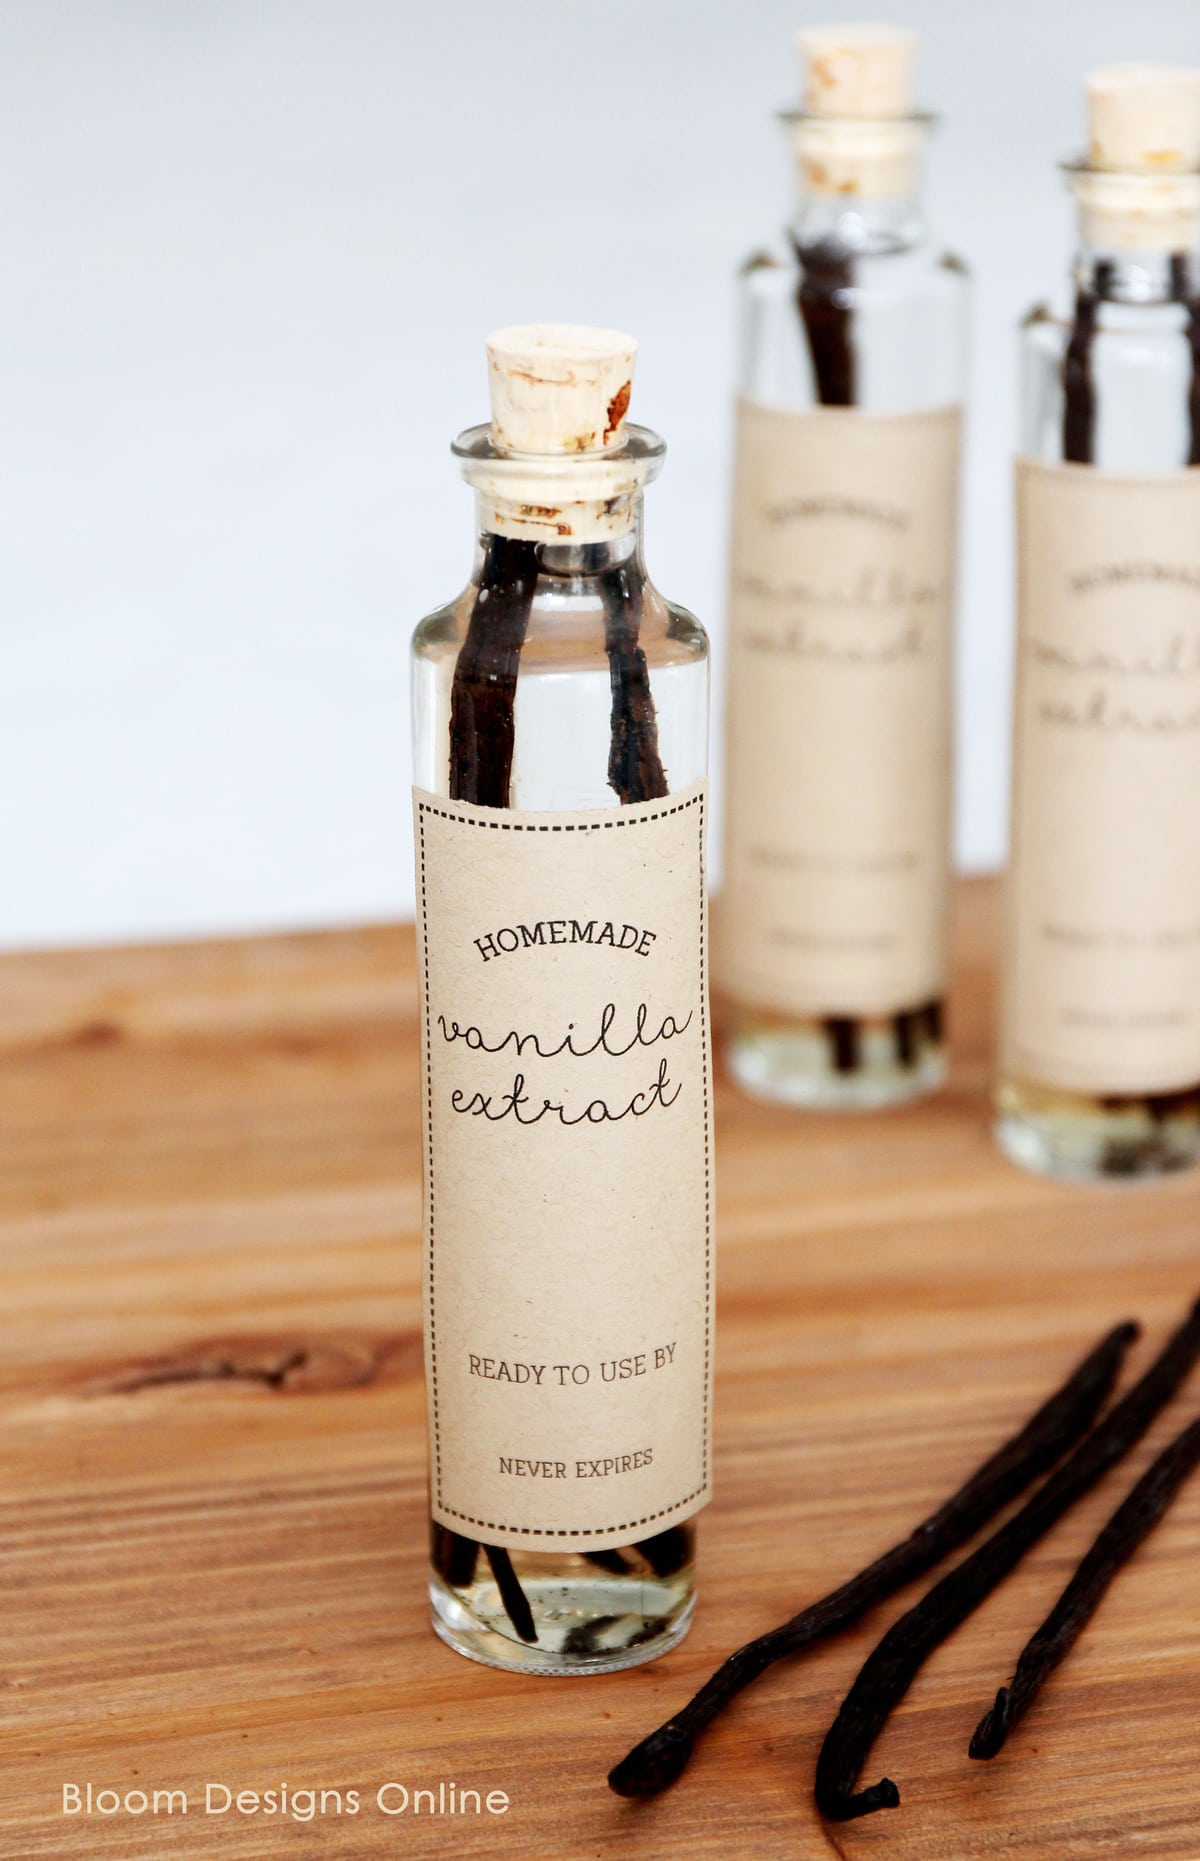 Homemade Vanilla Extract and gift idea. Such a simple and yummy handmade gift idea for anytime (especially the holidays!!) Get the free printable tags for this cute gift!